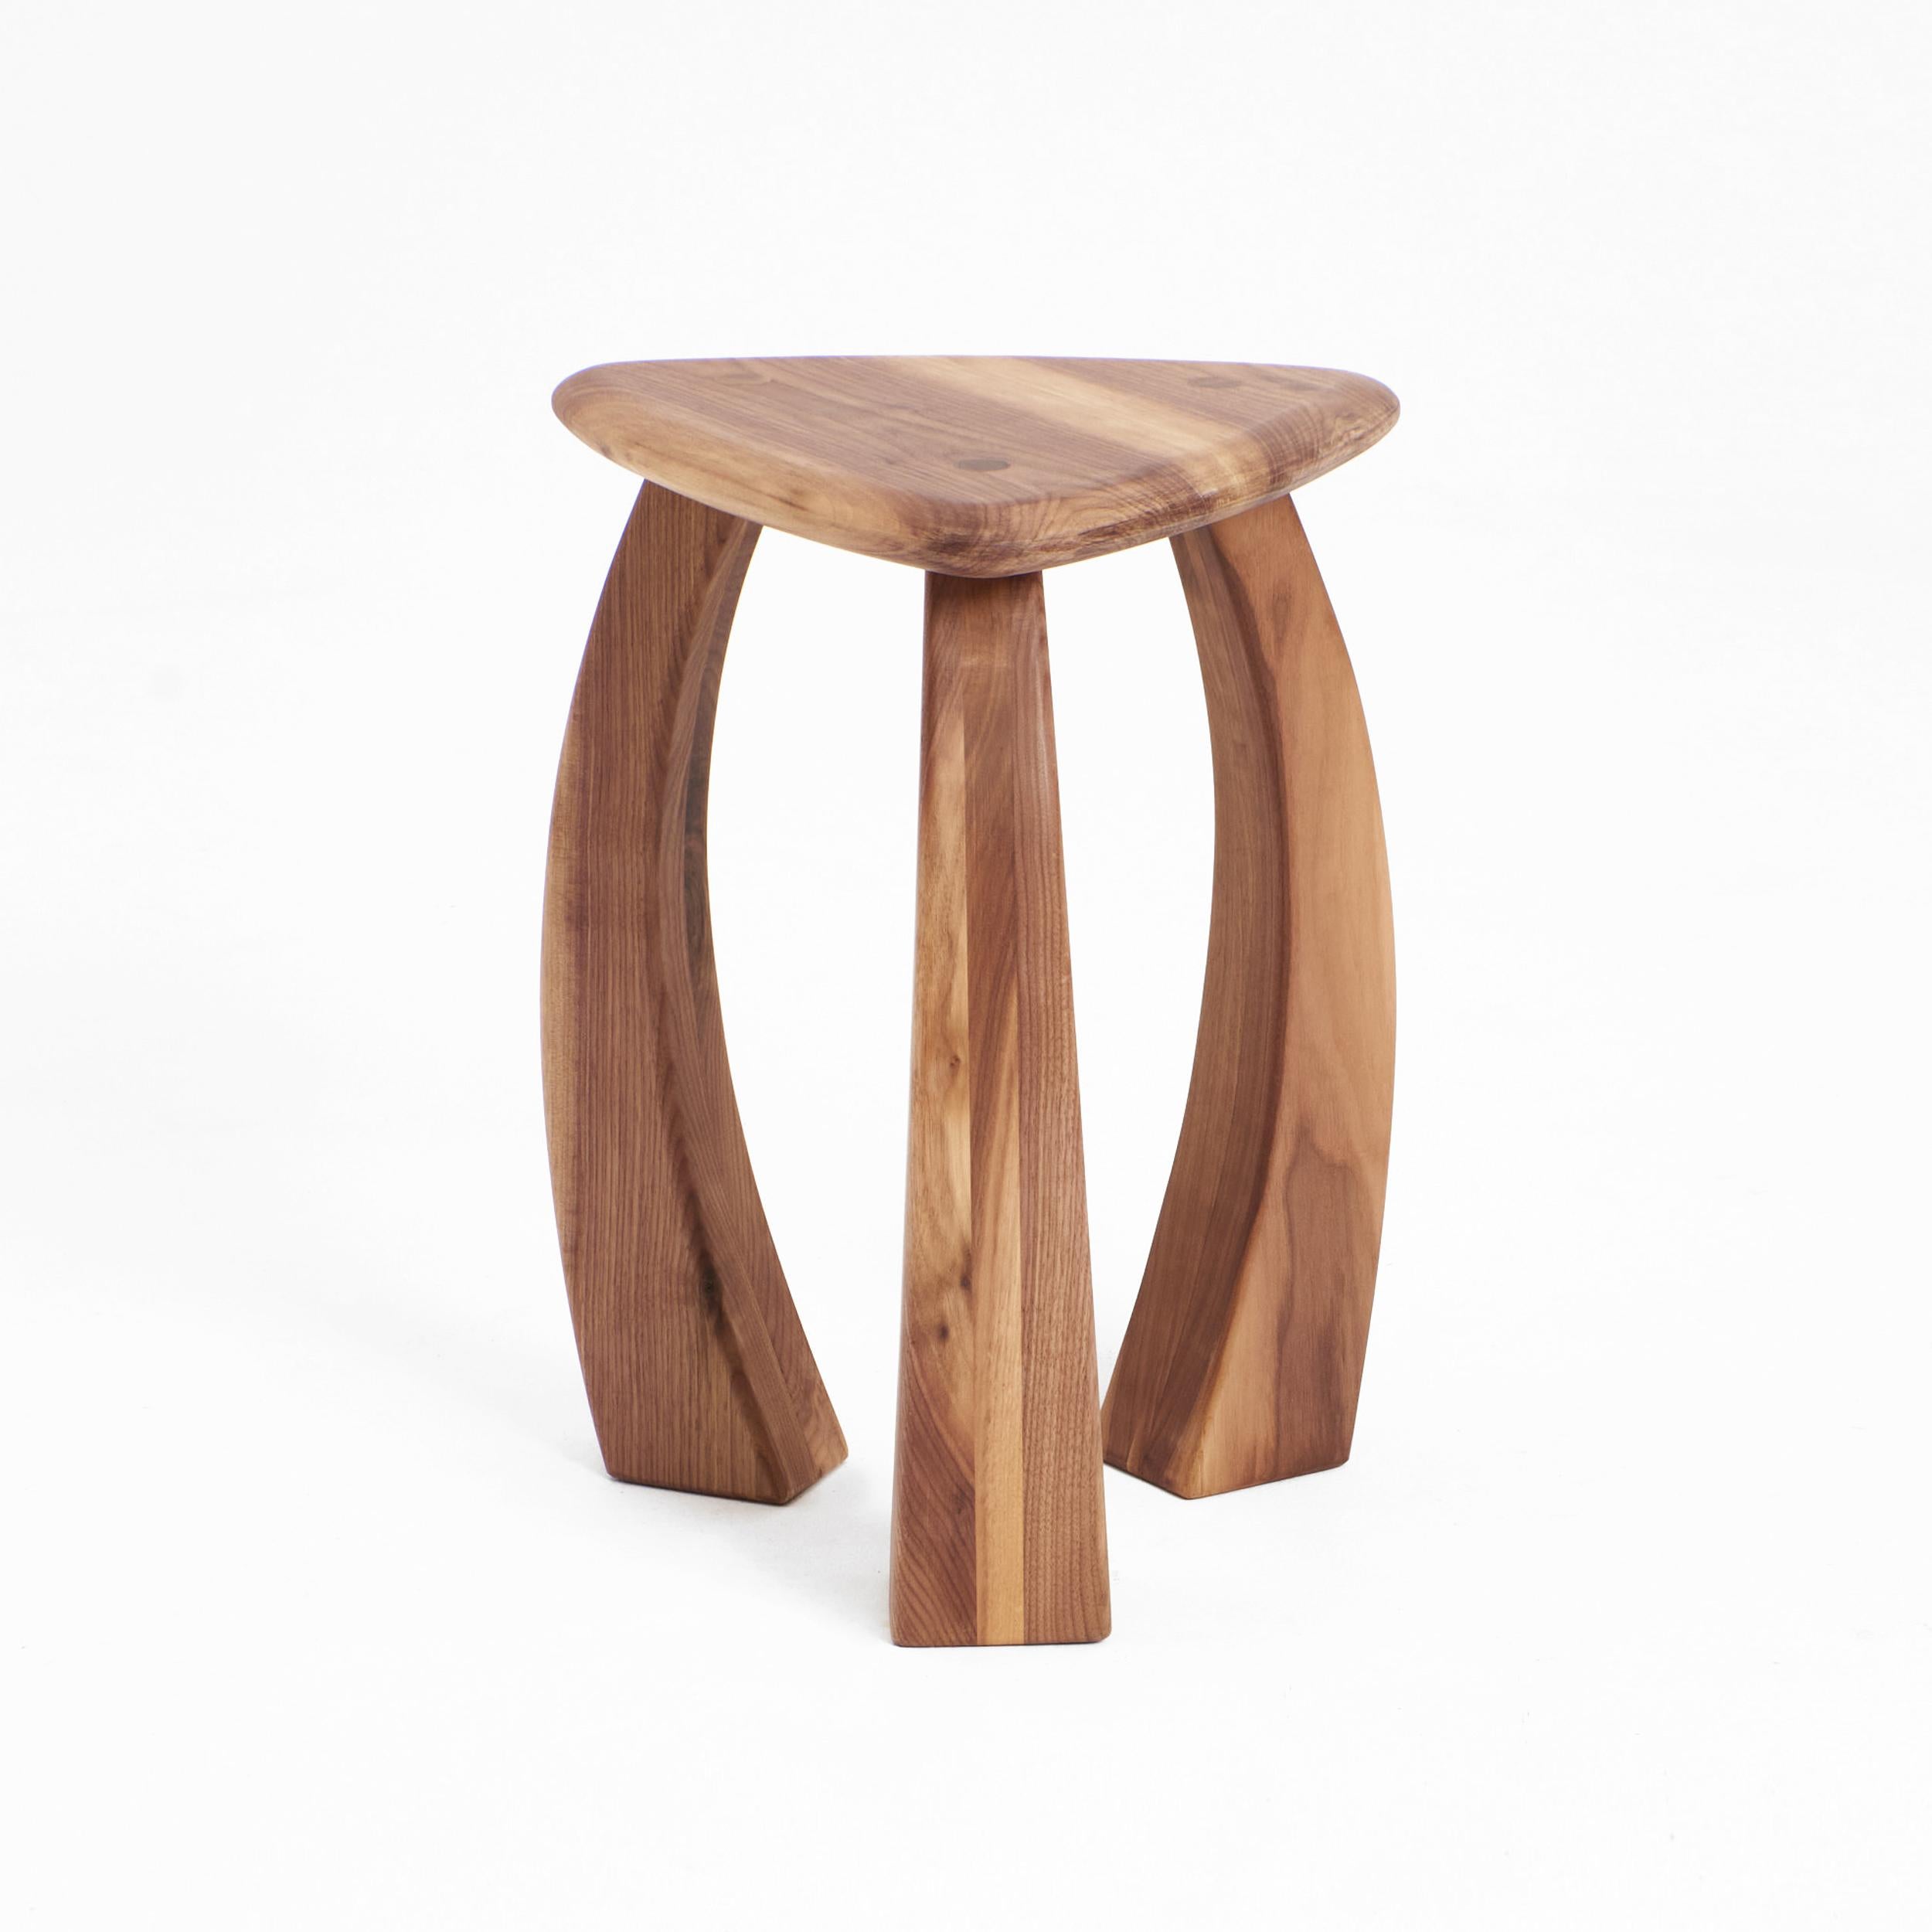 Arc de stool 52 in Walnut by Project 213A
Dimensions: D 39 x W 39 x H 52 cm
Materials: Walnut wood. 

The taller version of the stool's legs curves inwards towards its triangular seat, fusing to showcase exquisite craftsmanship. The elegant